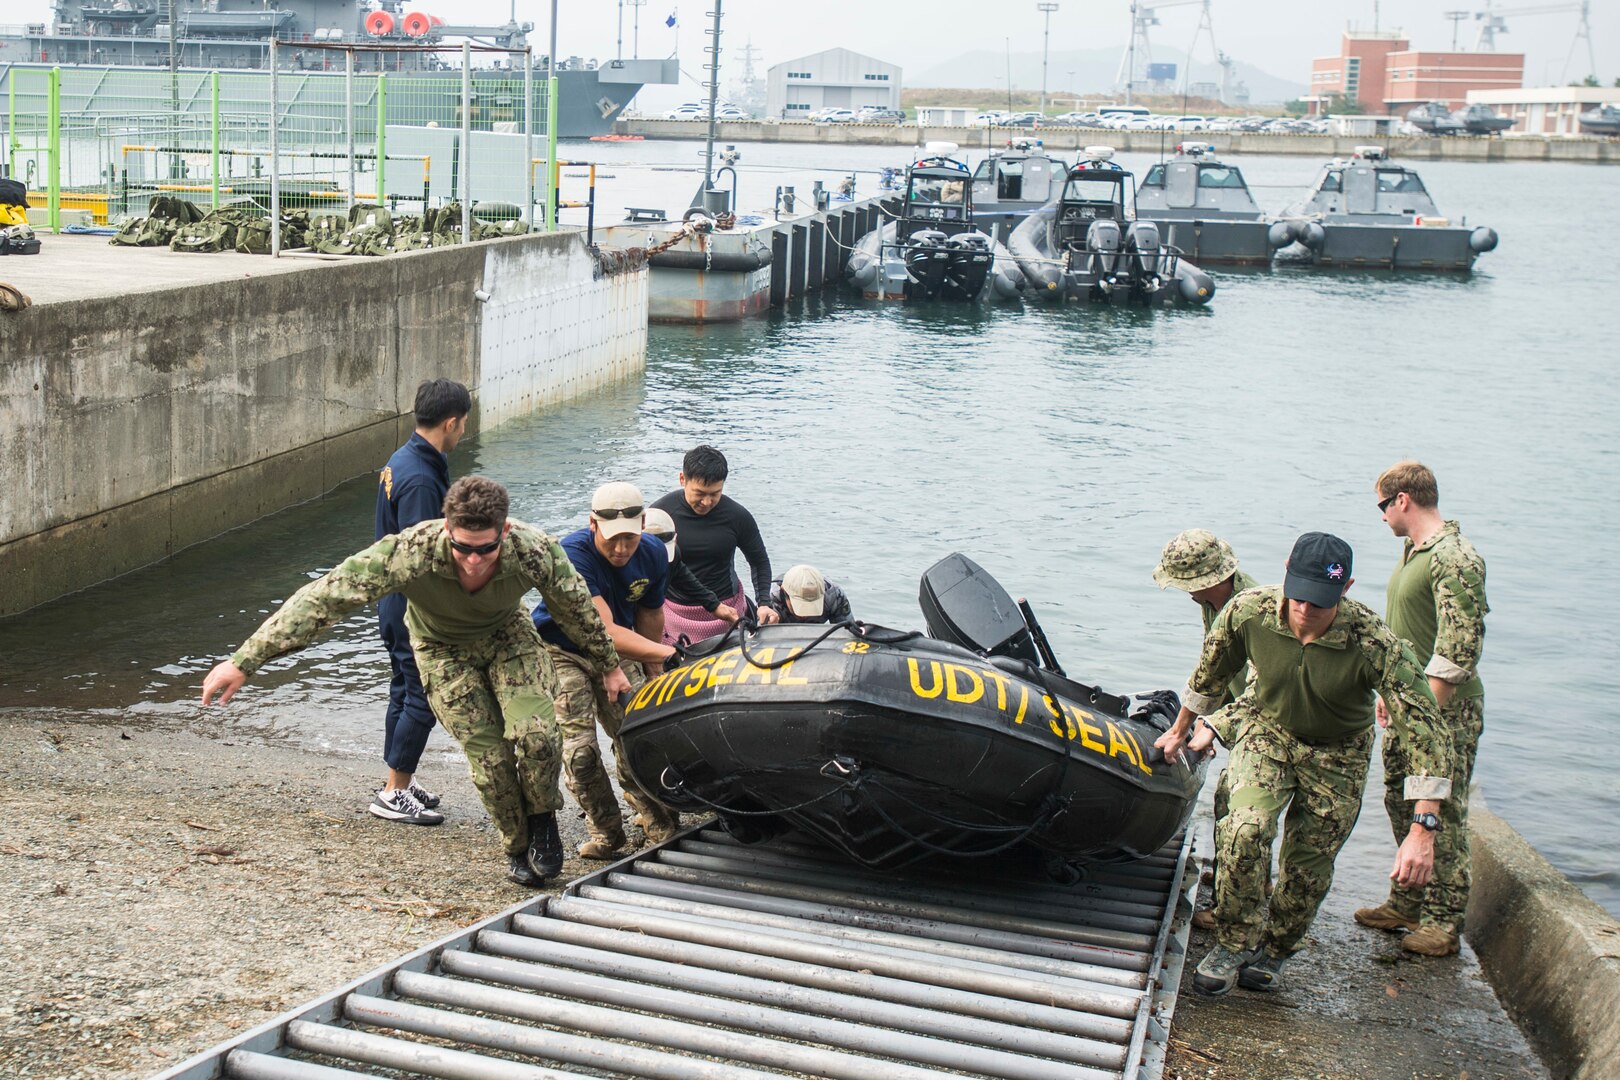 Participants in Clear Horizon (CH16) recover a boat after concluding diving operations in Chinhae, Korea on Oct. 18, 2016. CH16 is a live-action exercise which enhances cooperation and improves capabilities in mine countermeasures operations, with participating nations including Republic of Korea Navy, United States, Australia, Canada, New Zealand, Philippines, Thailand, and the United Kingdom. (U.S. Navy Combat Camera Photo by Petty Officer 2nd Class Daniel Rolston)